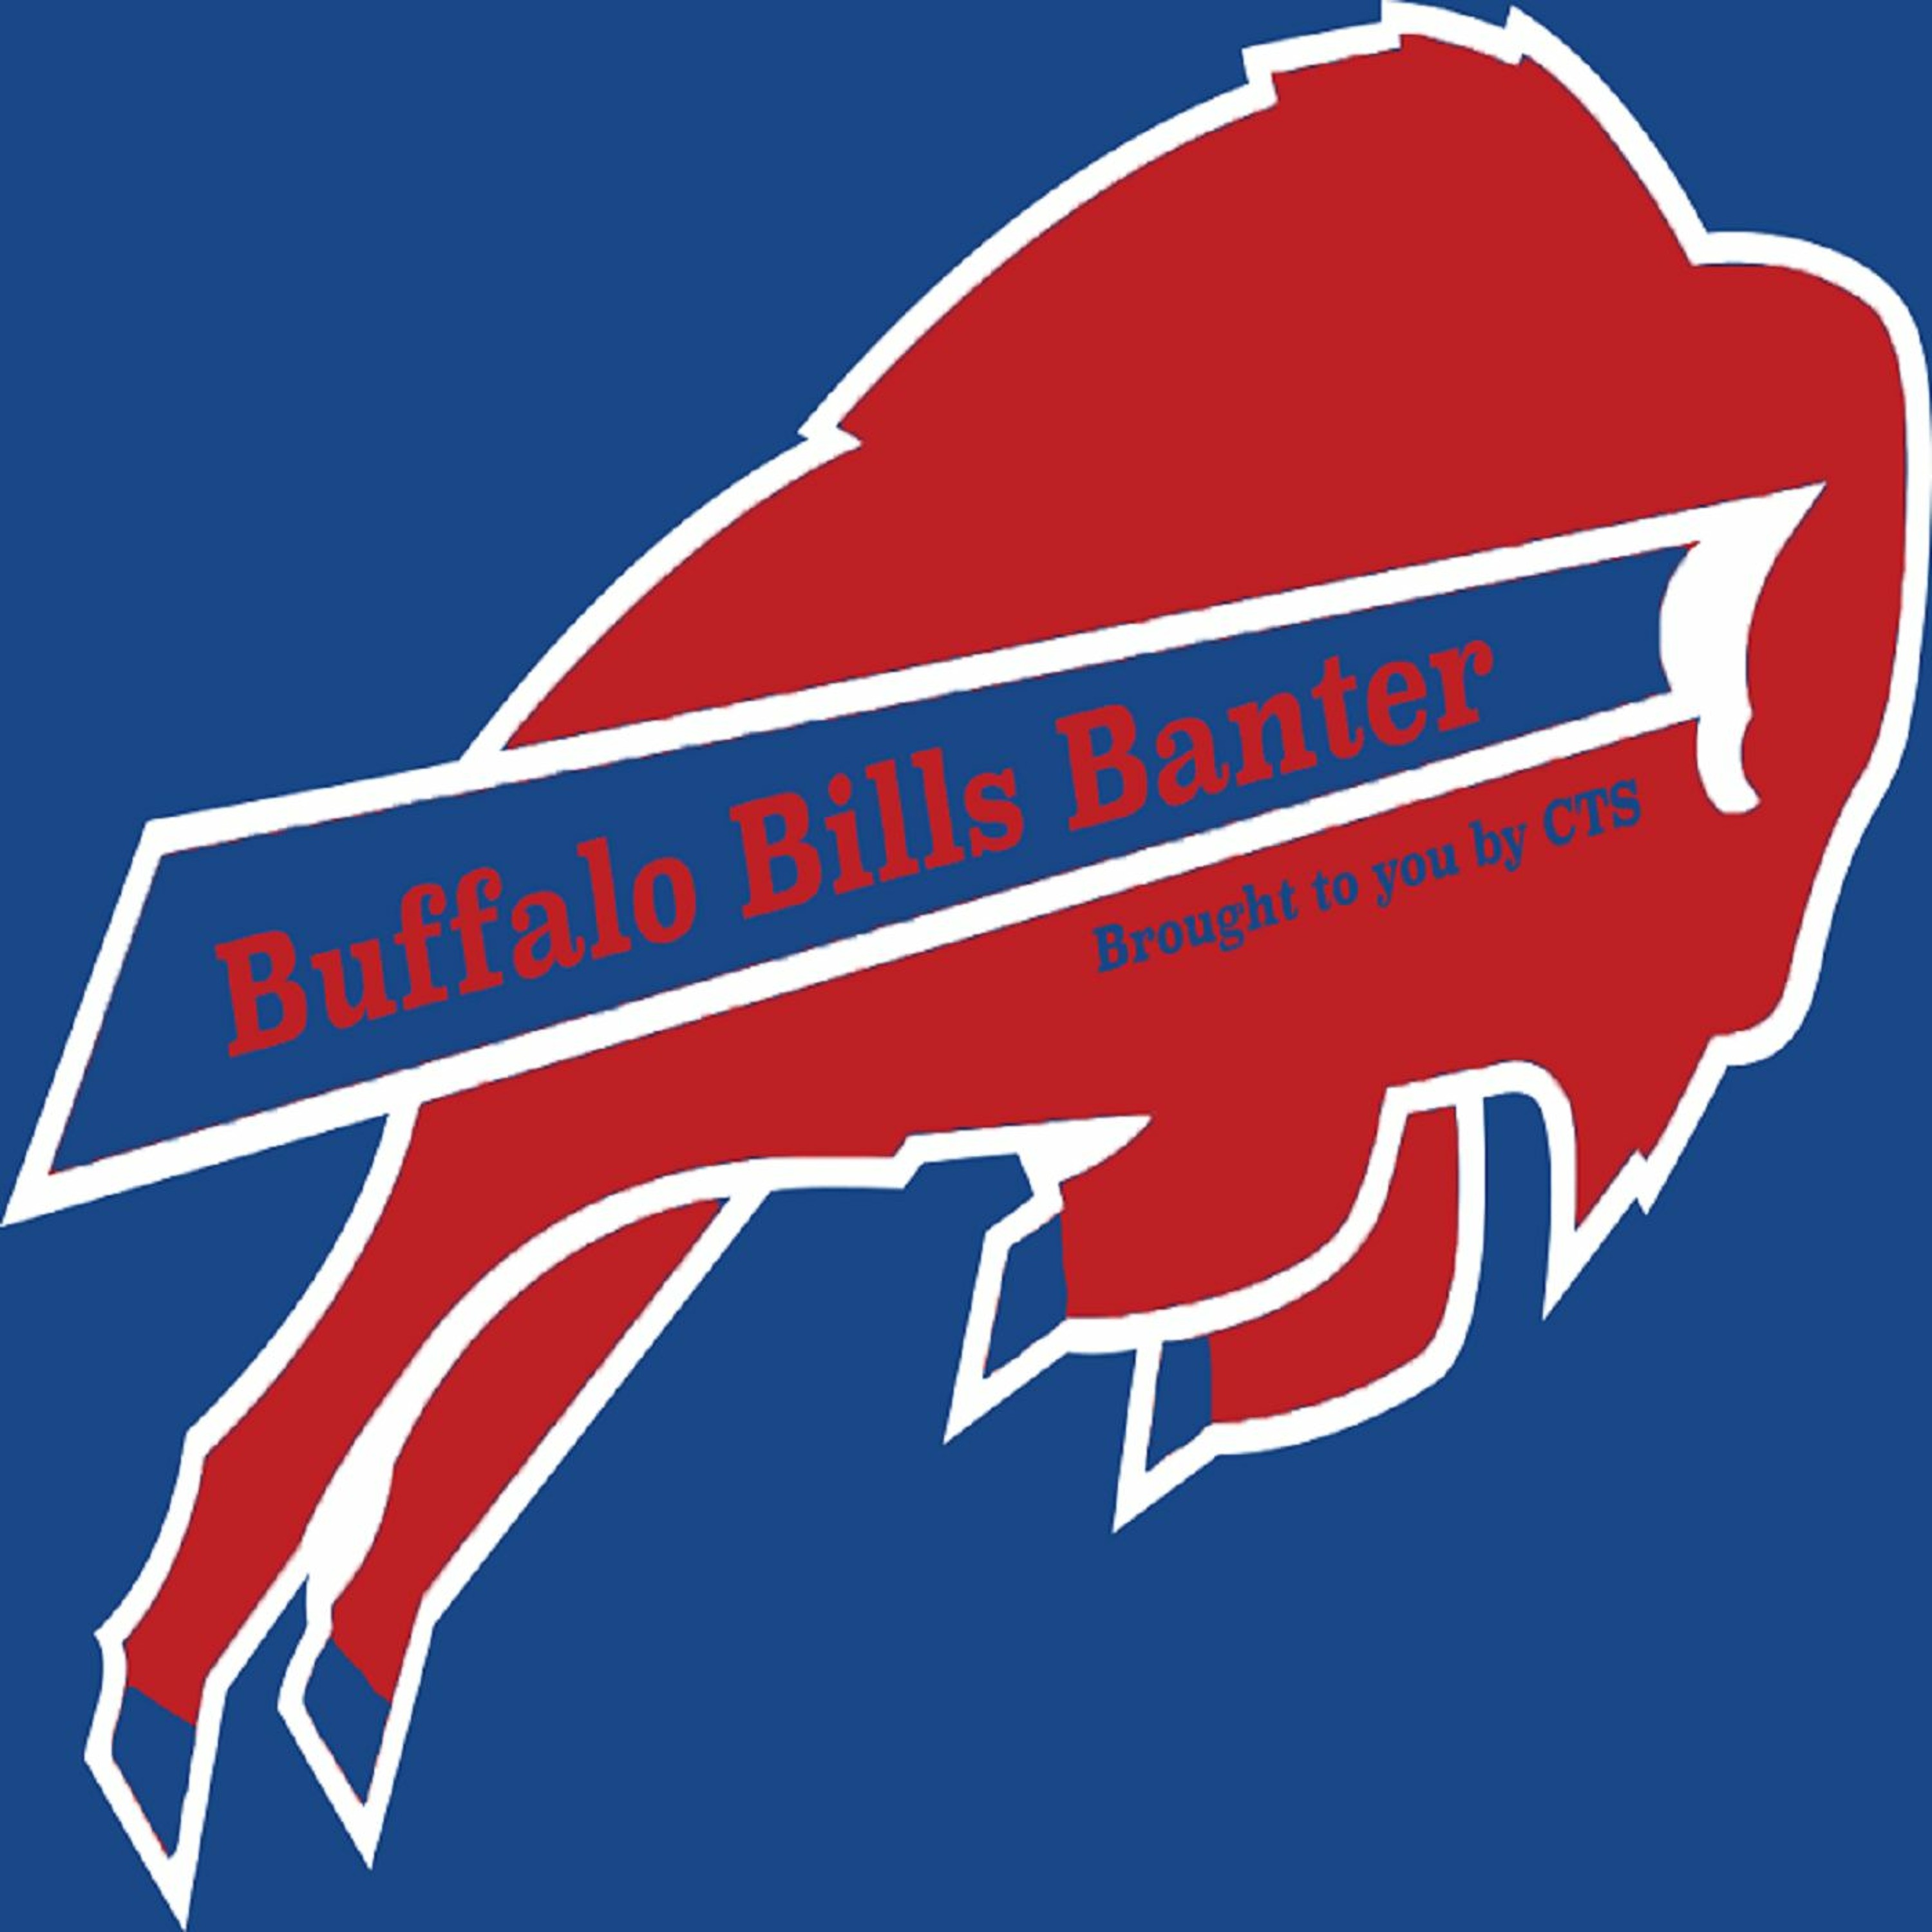 Buffalo Bills Banter Episode 14 Titans Thoughts And Bengals Preview